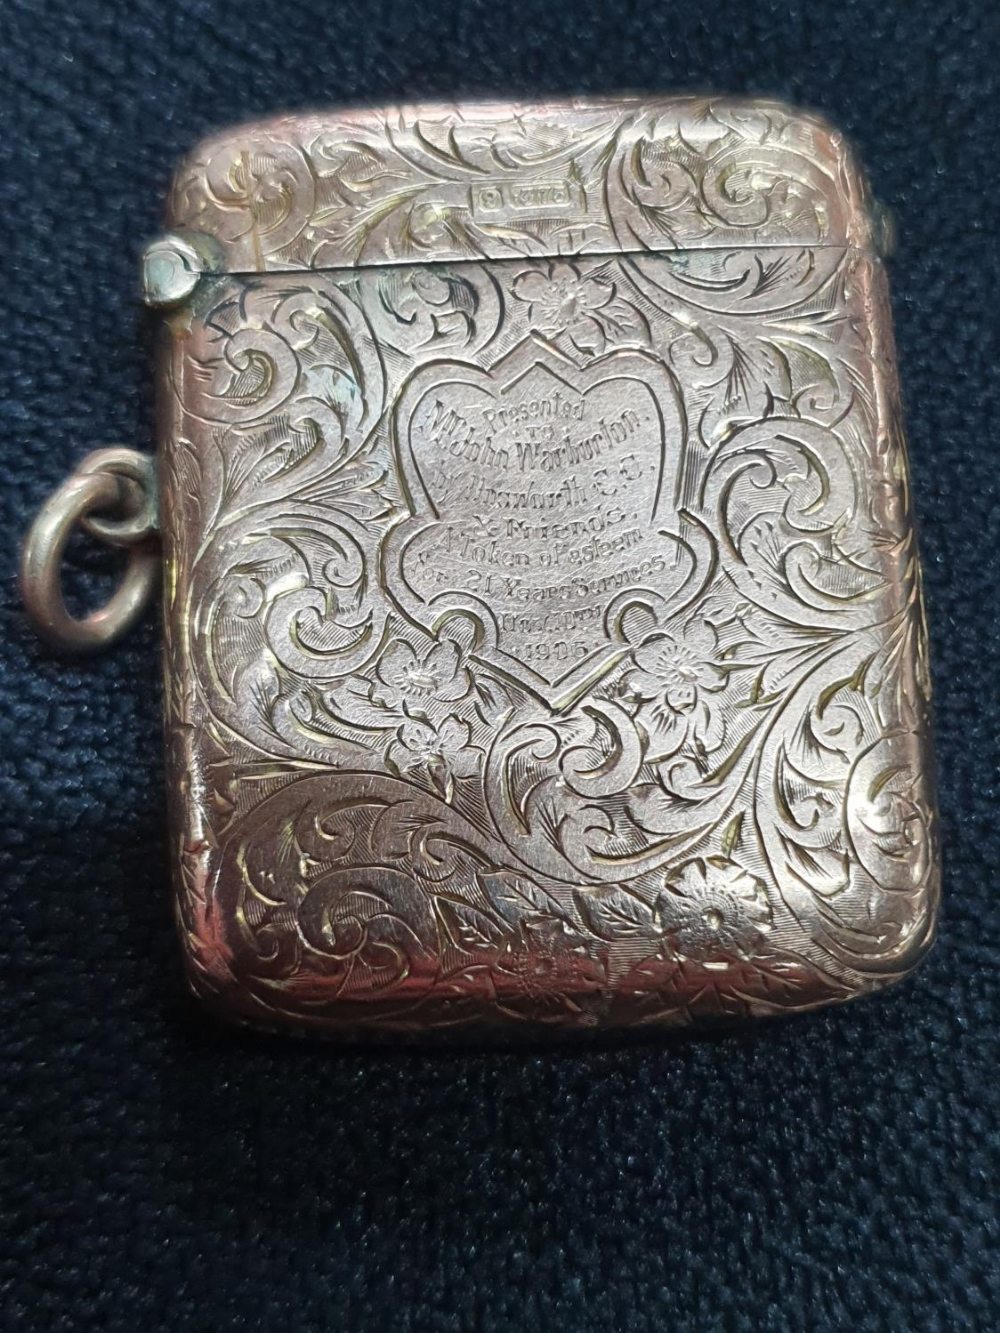 Extensively engraved with presentation area to front, 9ct Rose gold 1906 Vesta case made in - Image 2 of 5